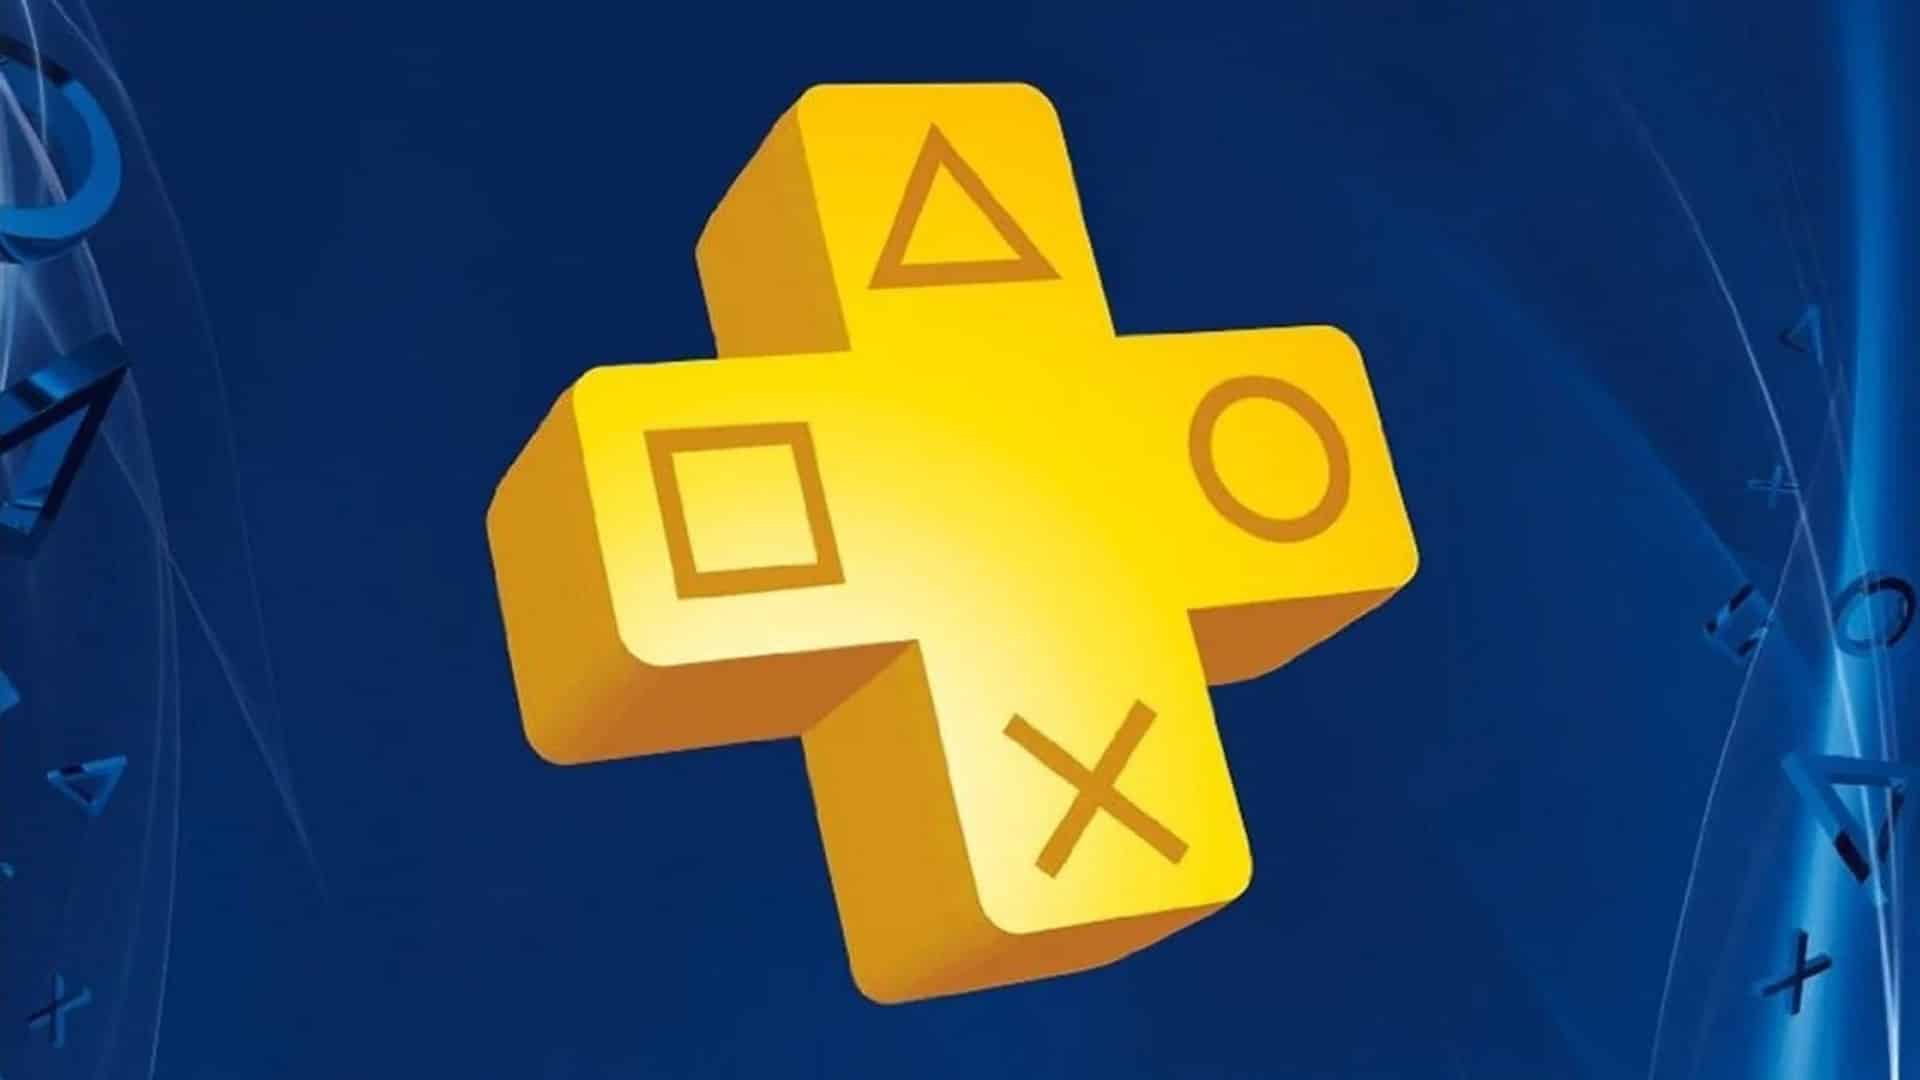 PlayStation Plus March 2021 Includes Final Fantasy VII Remake and More